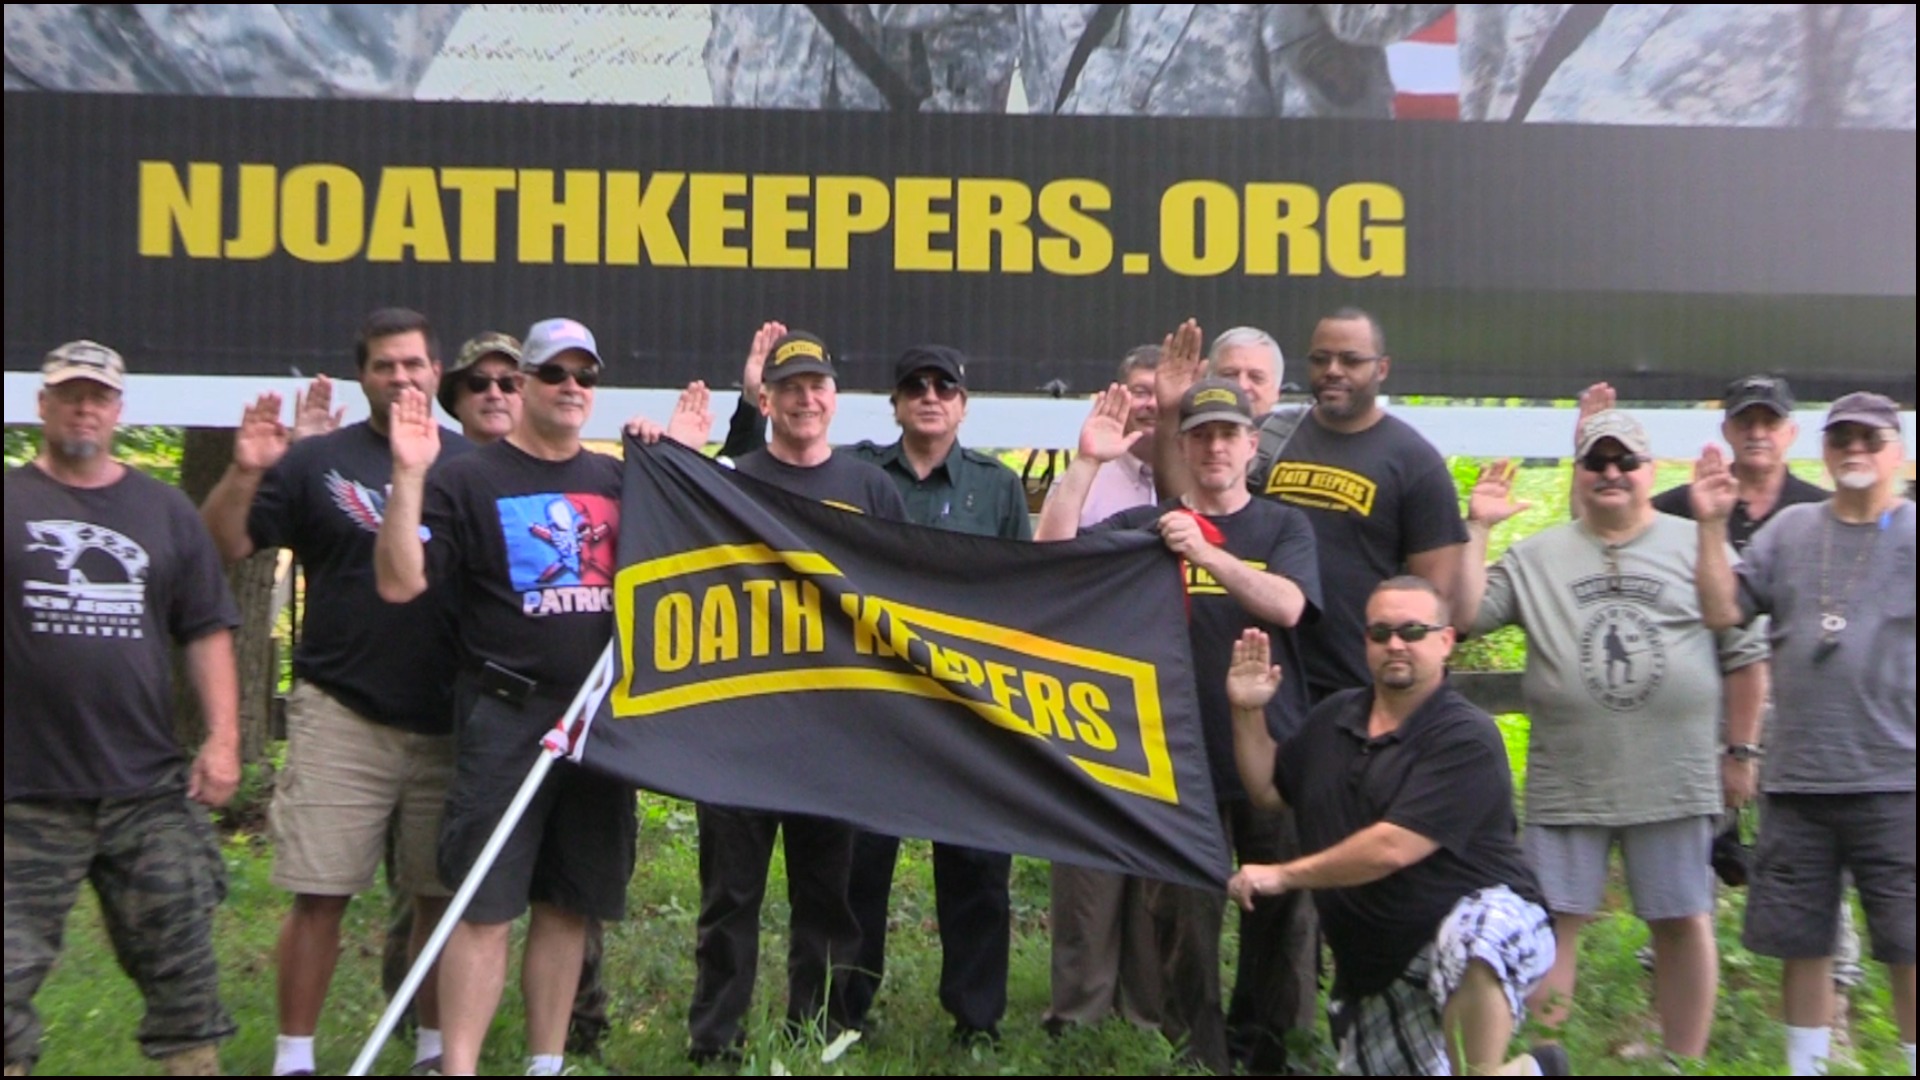 New Jersey Oath Keepers